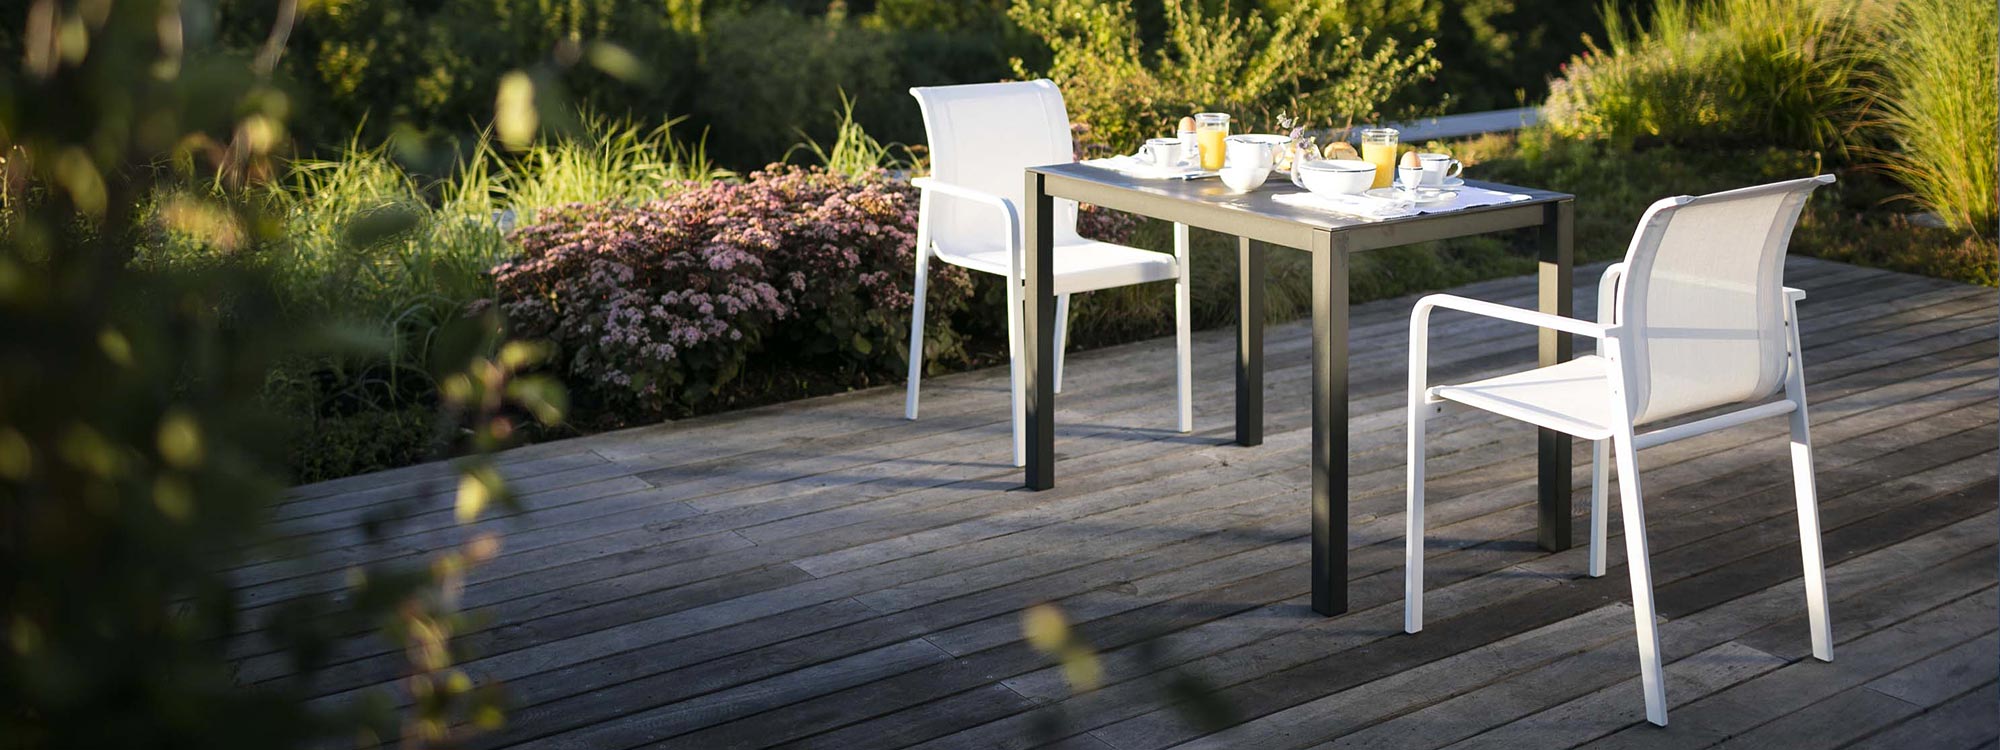 Puro small outdoor dining table and Puro modern garden chair on decking in front of flower bed